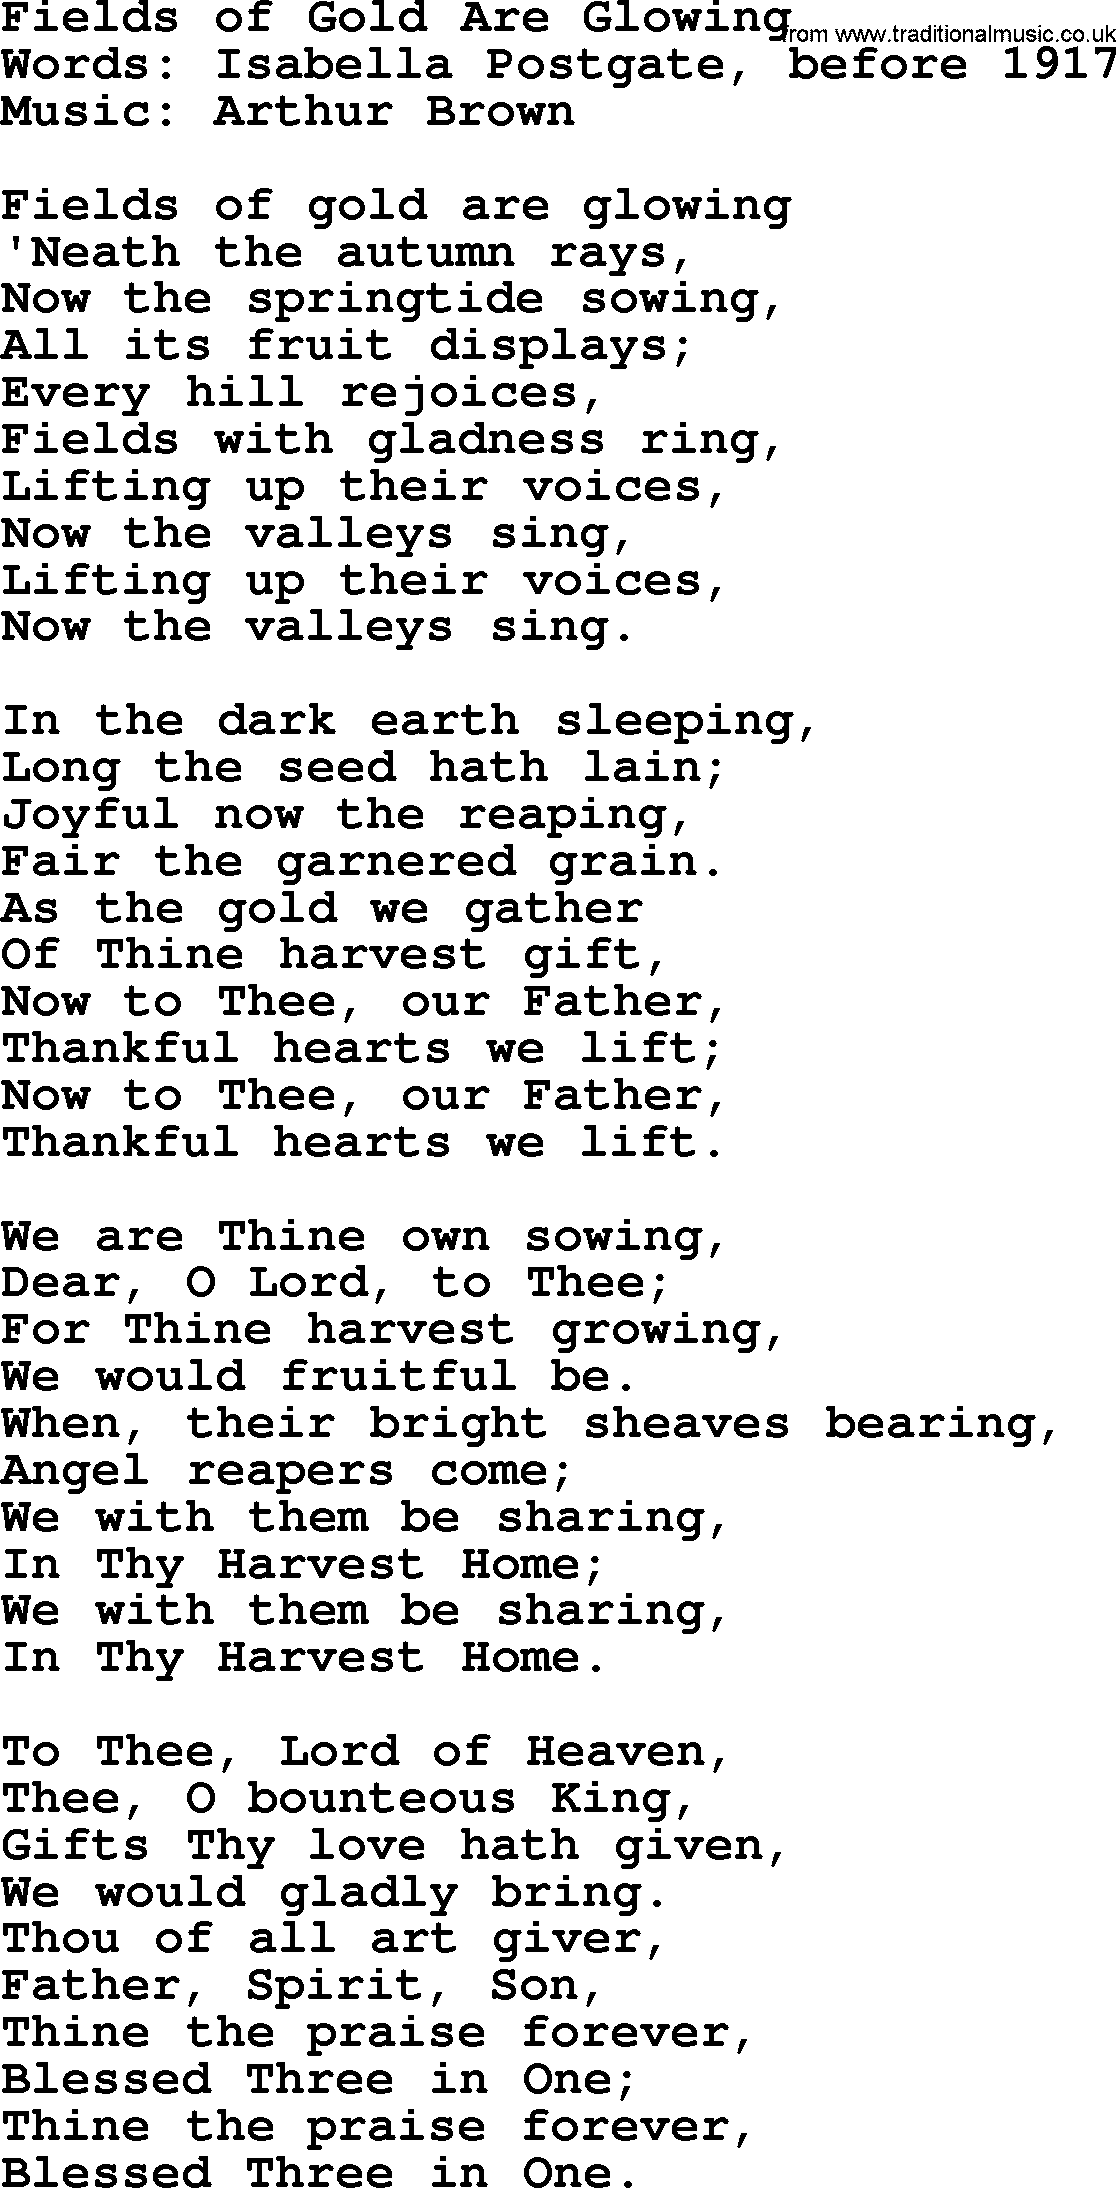 Hymns about Angels, Hymn: Fields Of Gold Are Glowing.txt lyrics with PDF